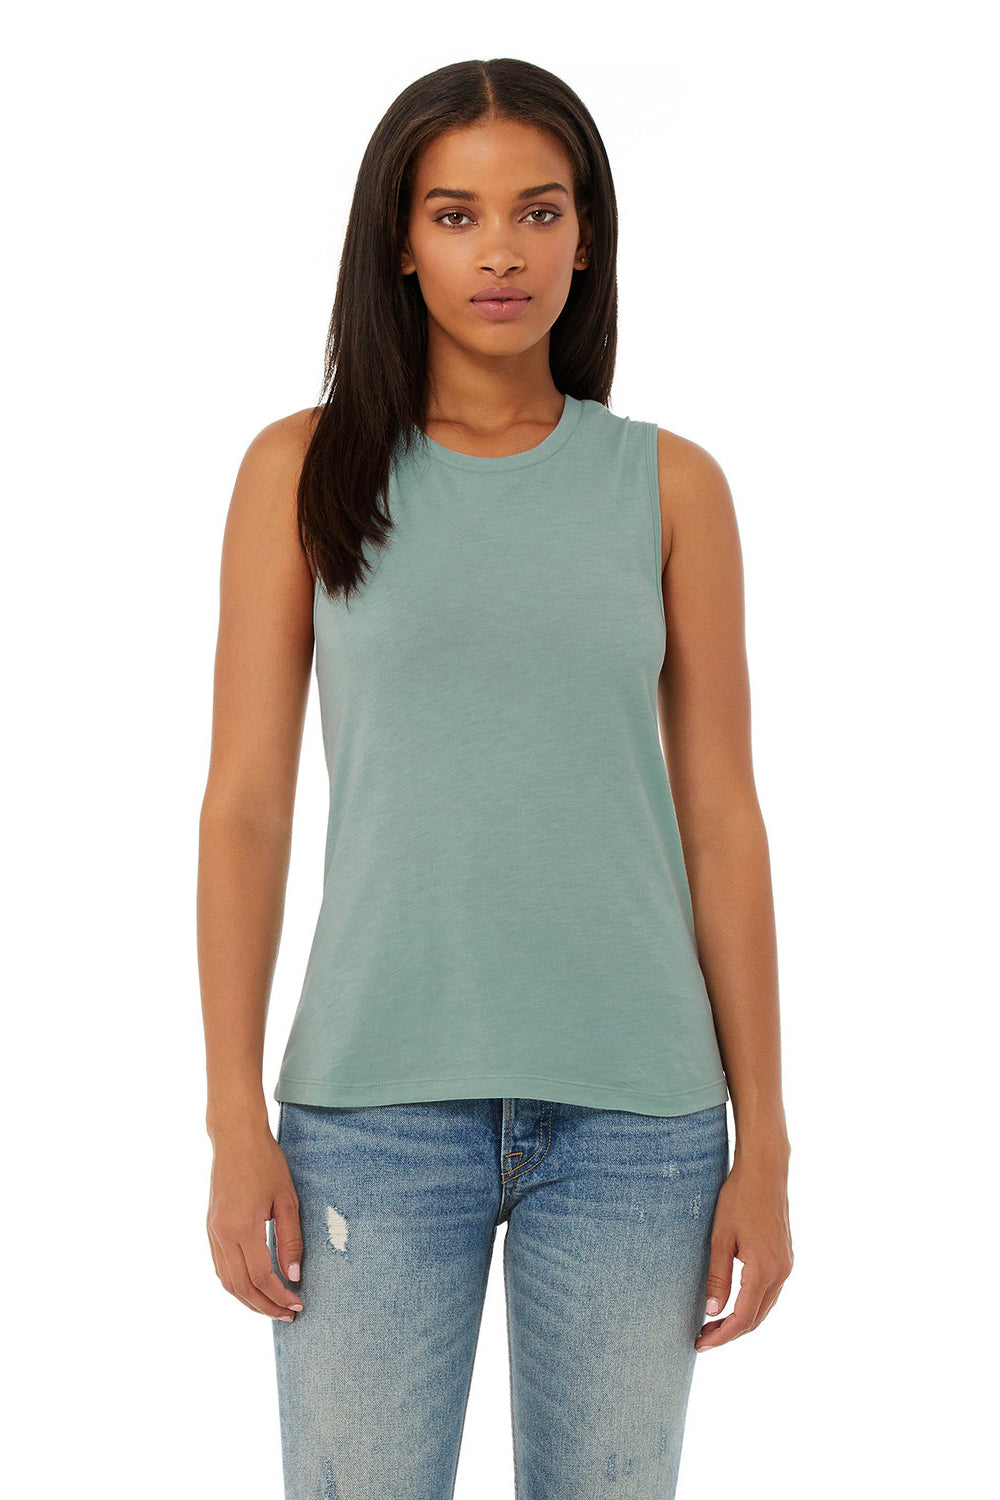 Bella + Canvas BC6003/B6003/6003 Womens Jersey Muscle Tank Top Heather Dusty Blue Model Front